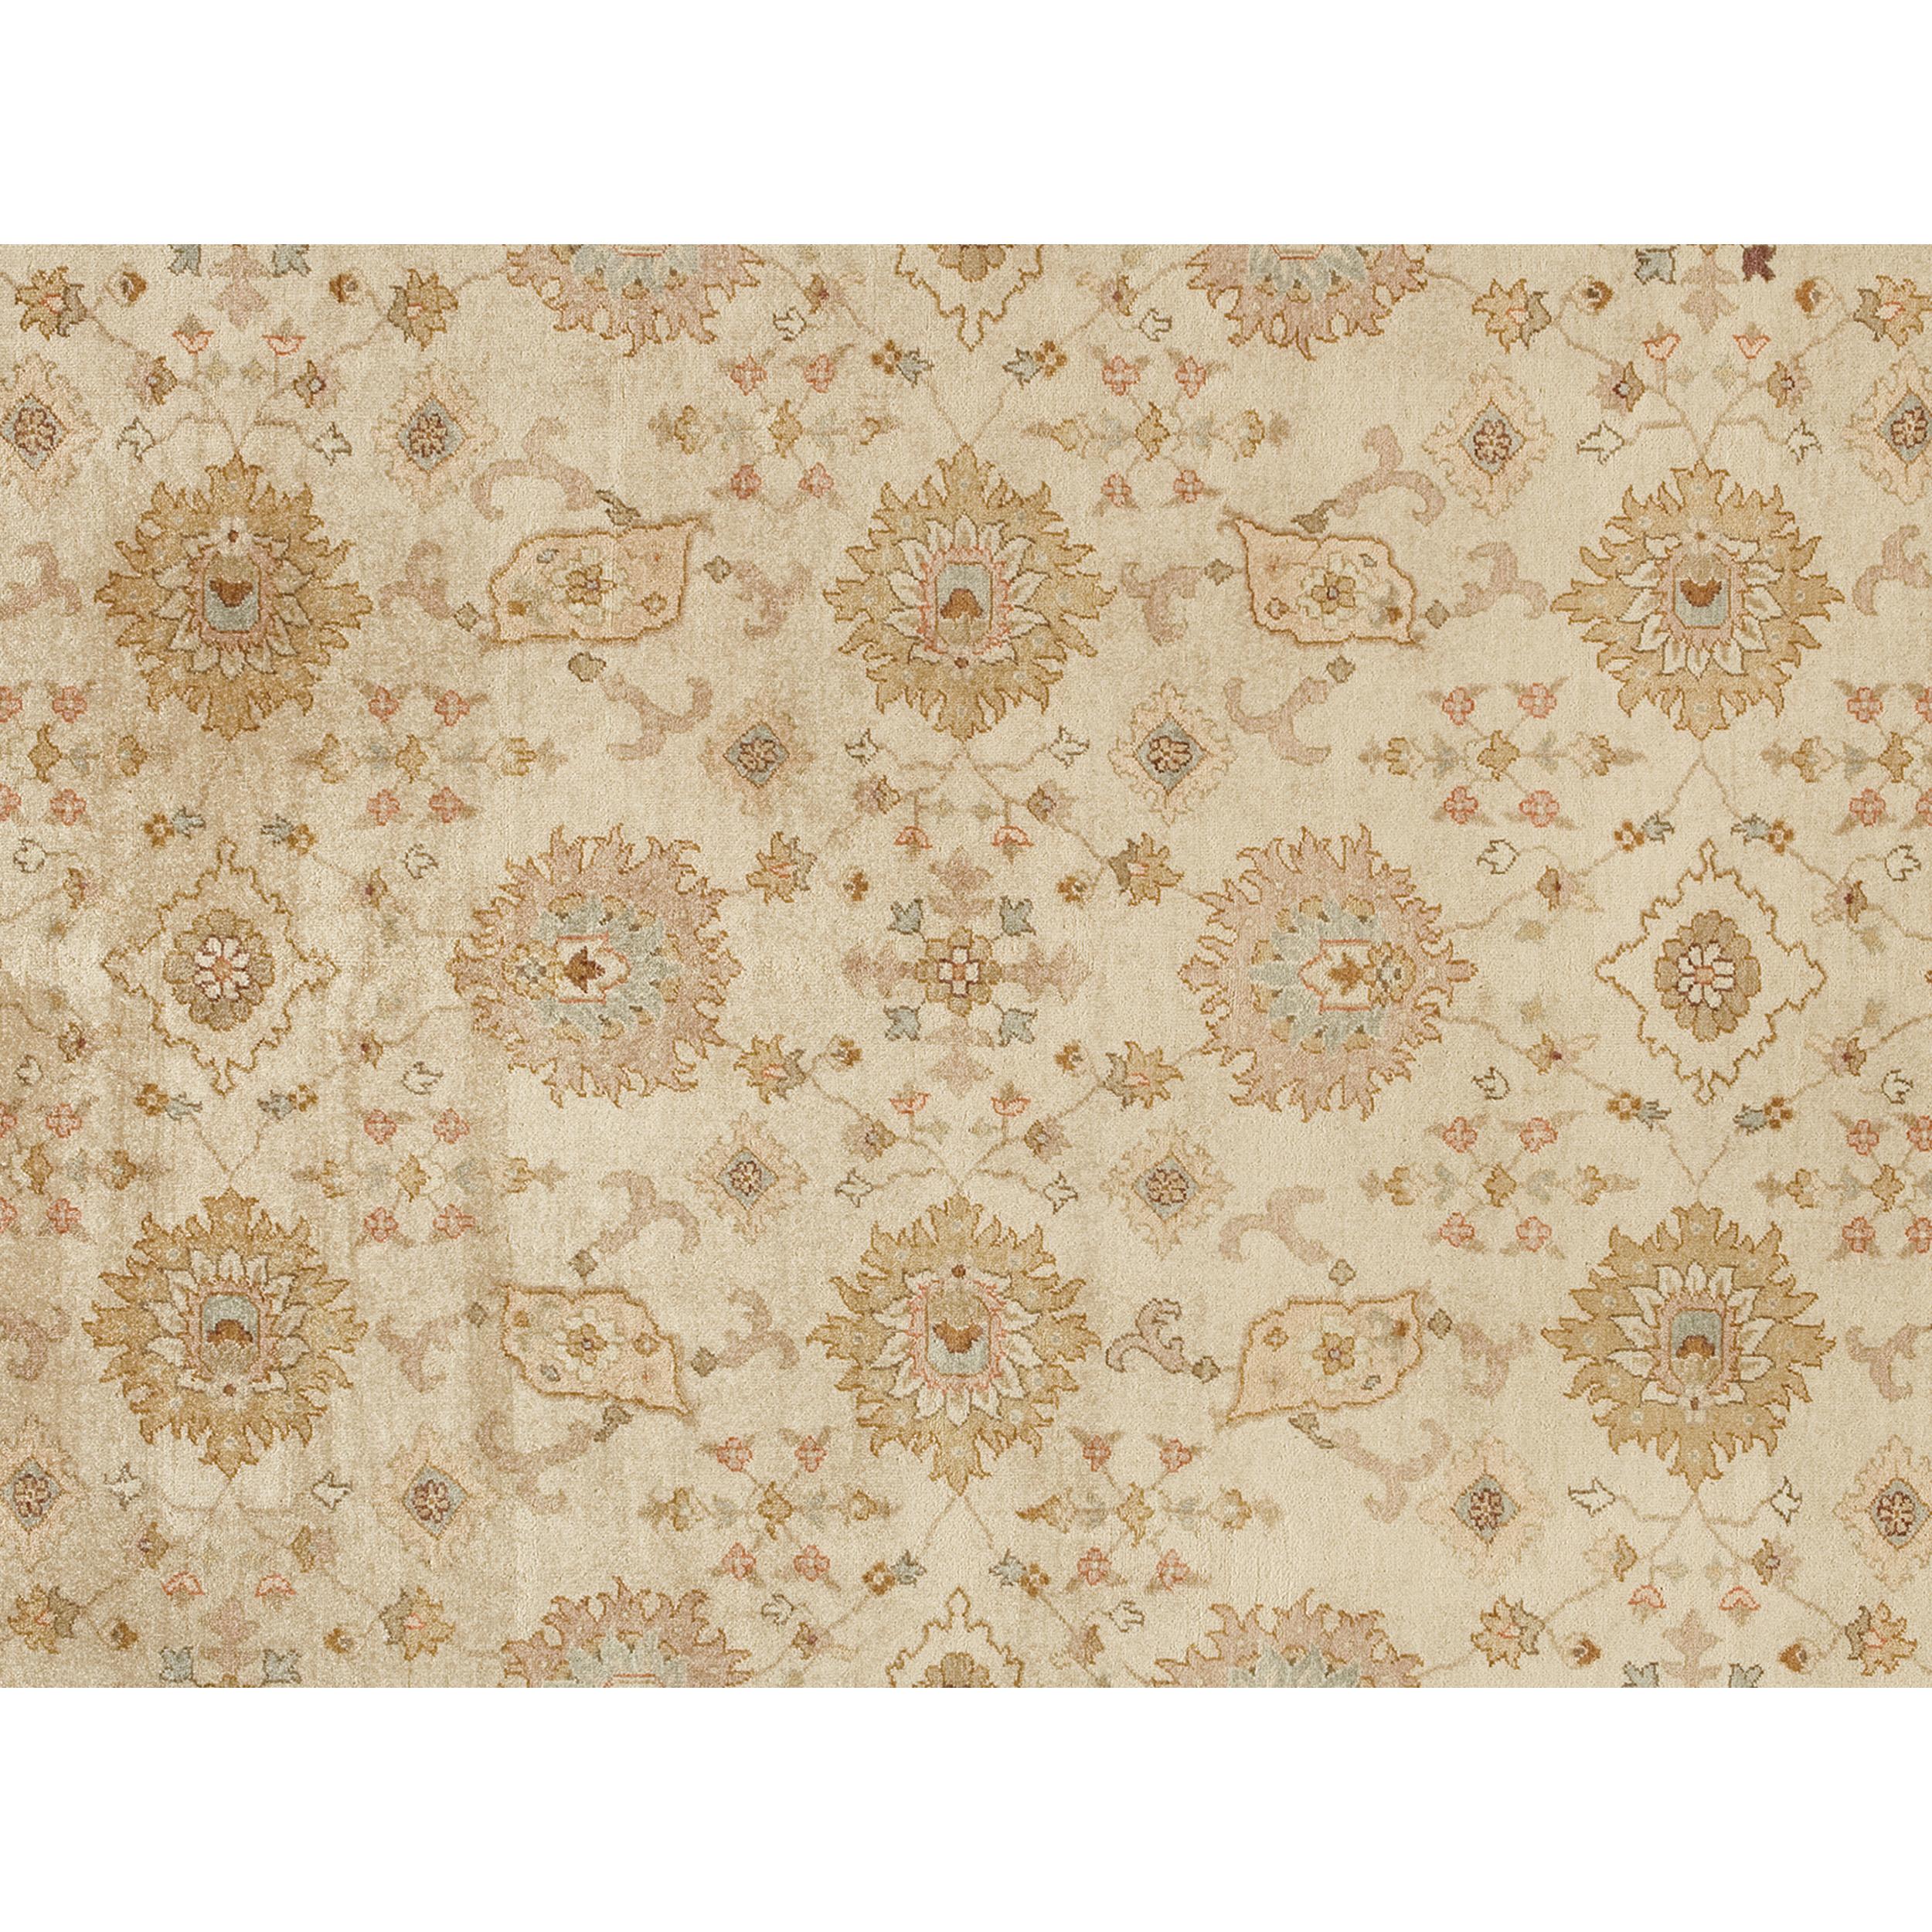 Agra Luxury Traditional Hand-Knotted Ivory/Seafoam 10x14 Area Rug For Sale